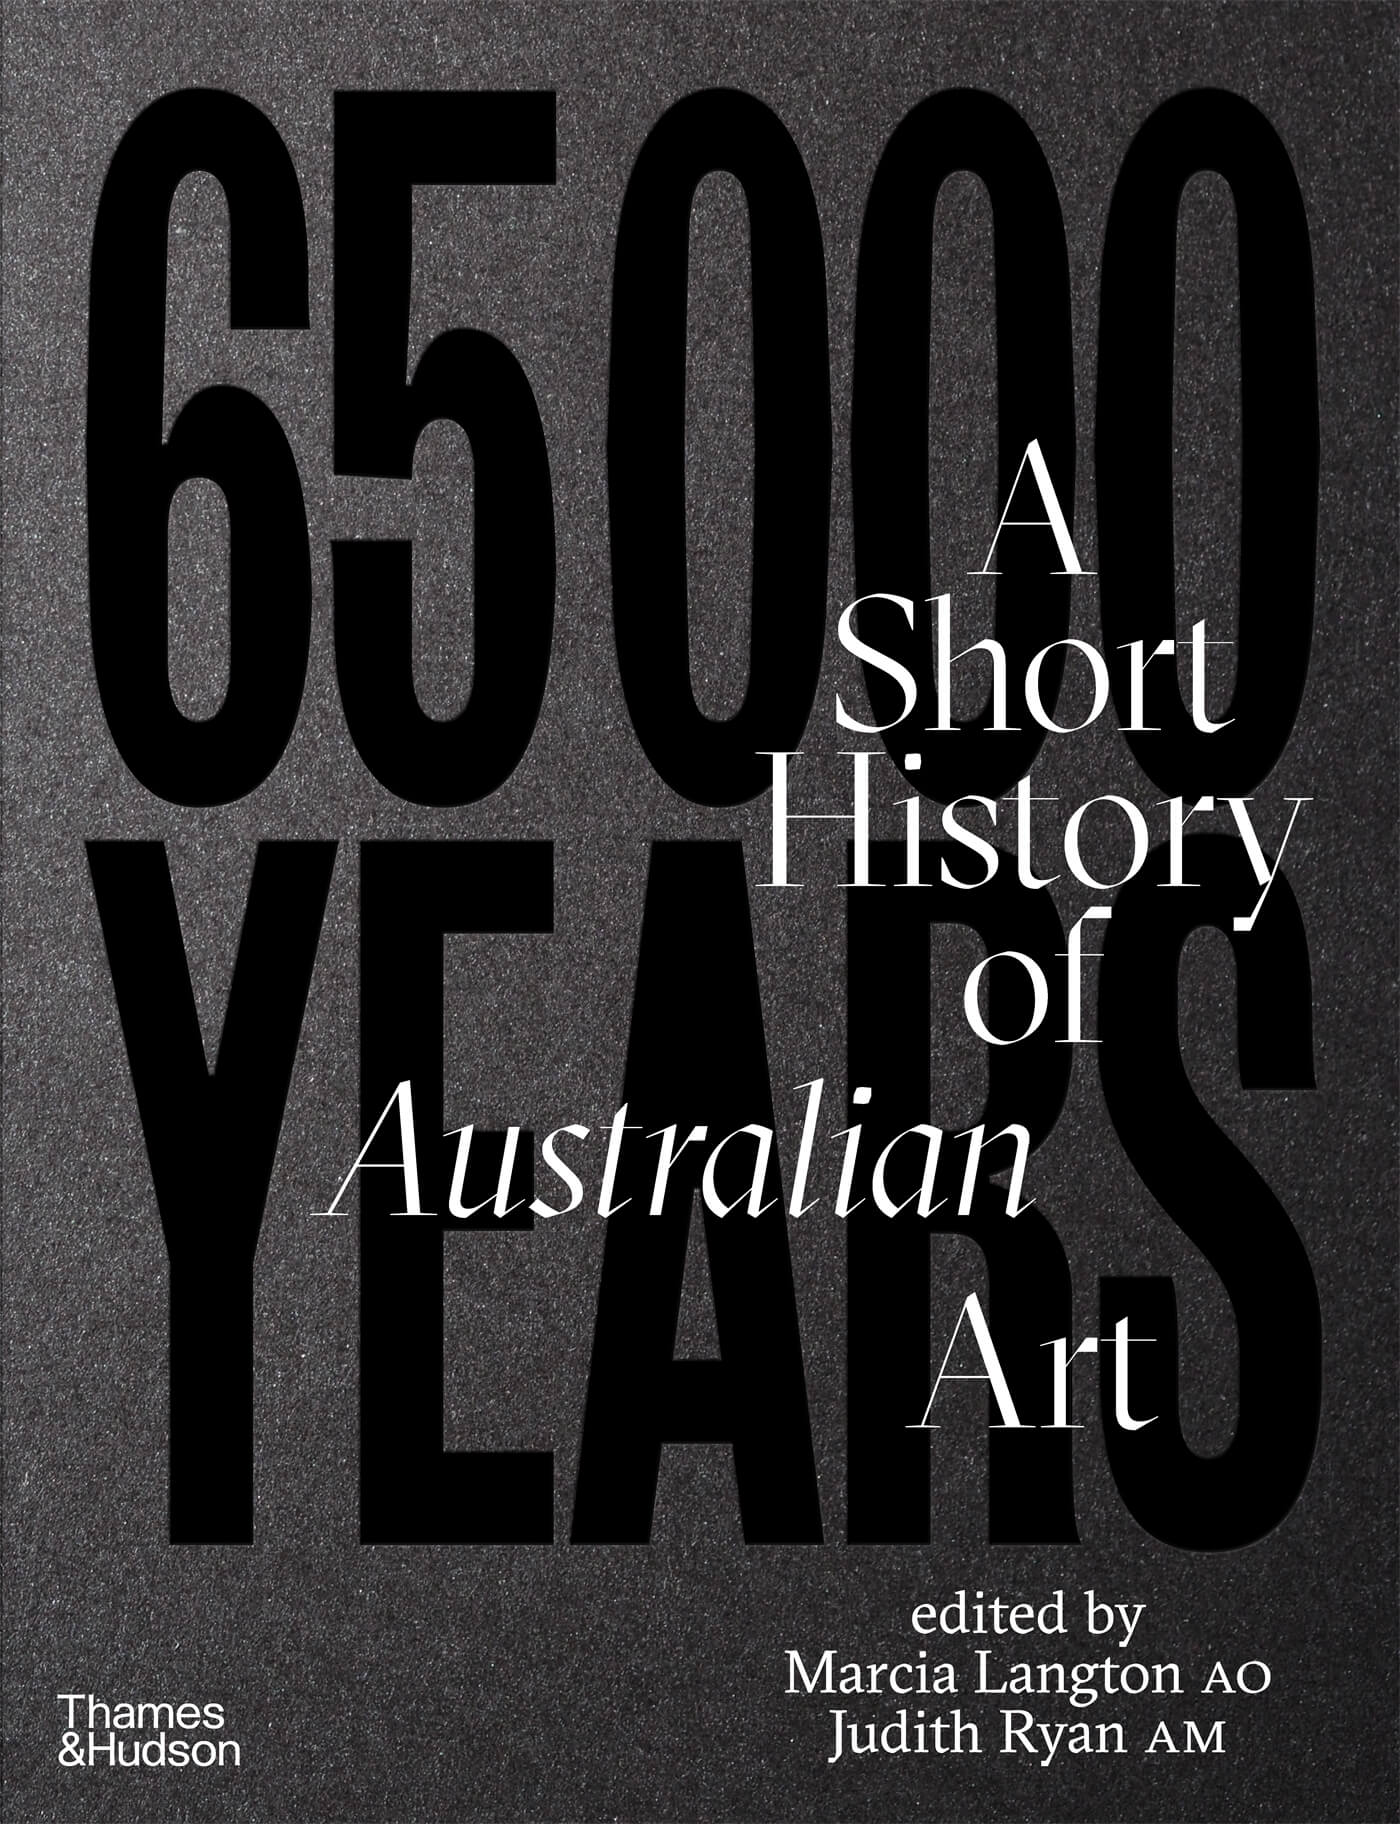 Cover of 65000 Years: A Short History of Australian Art.